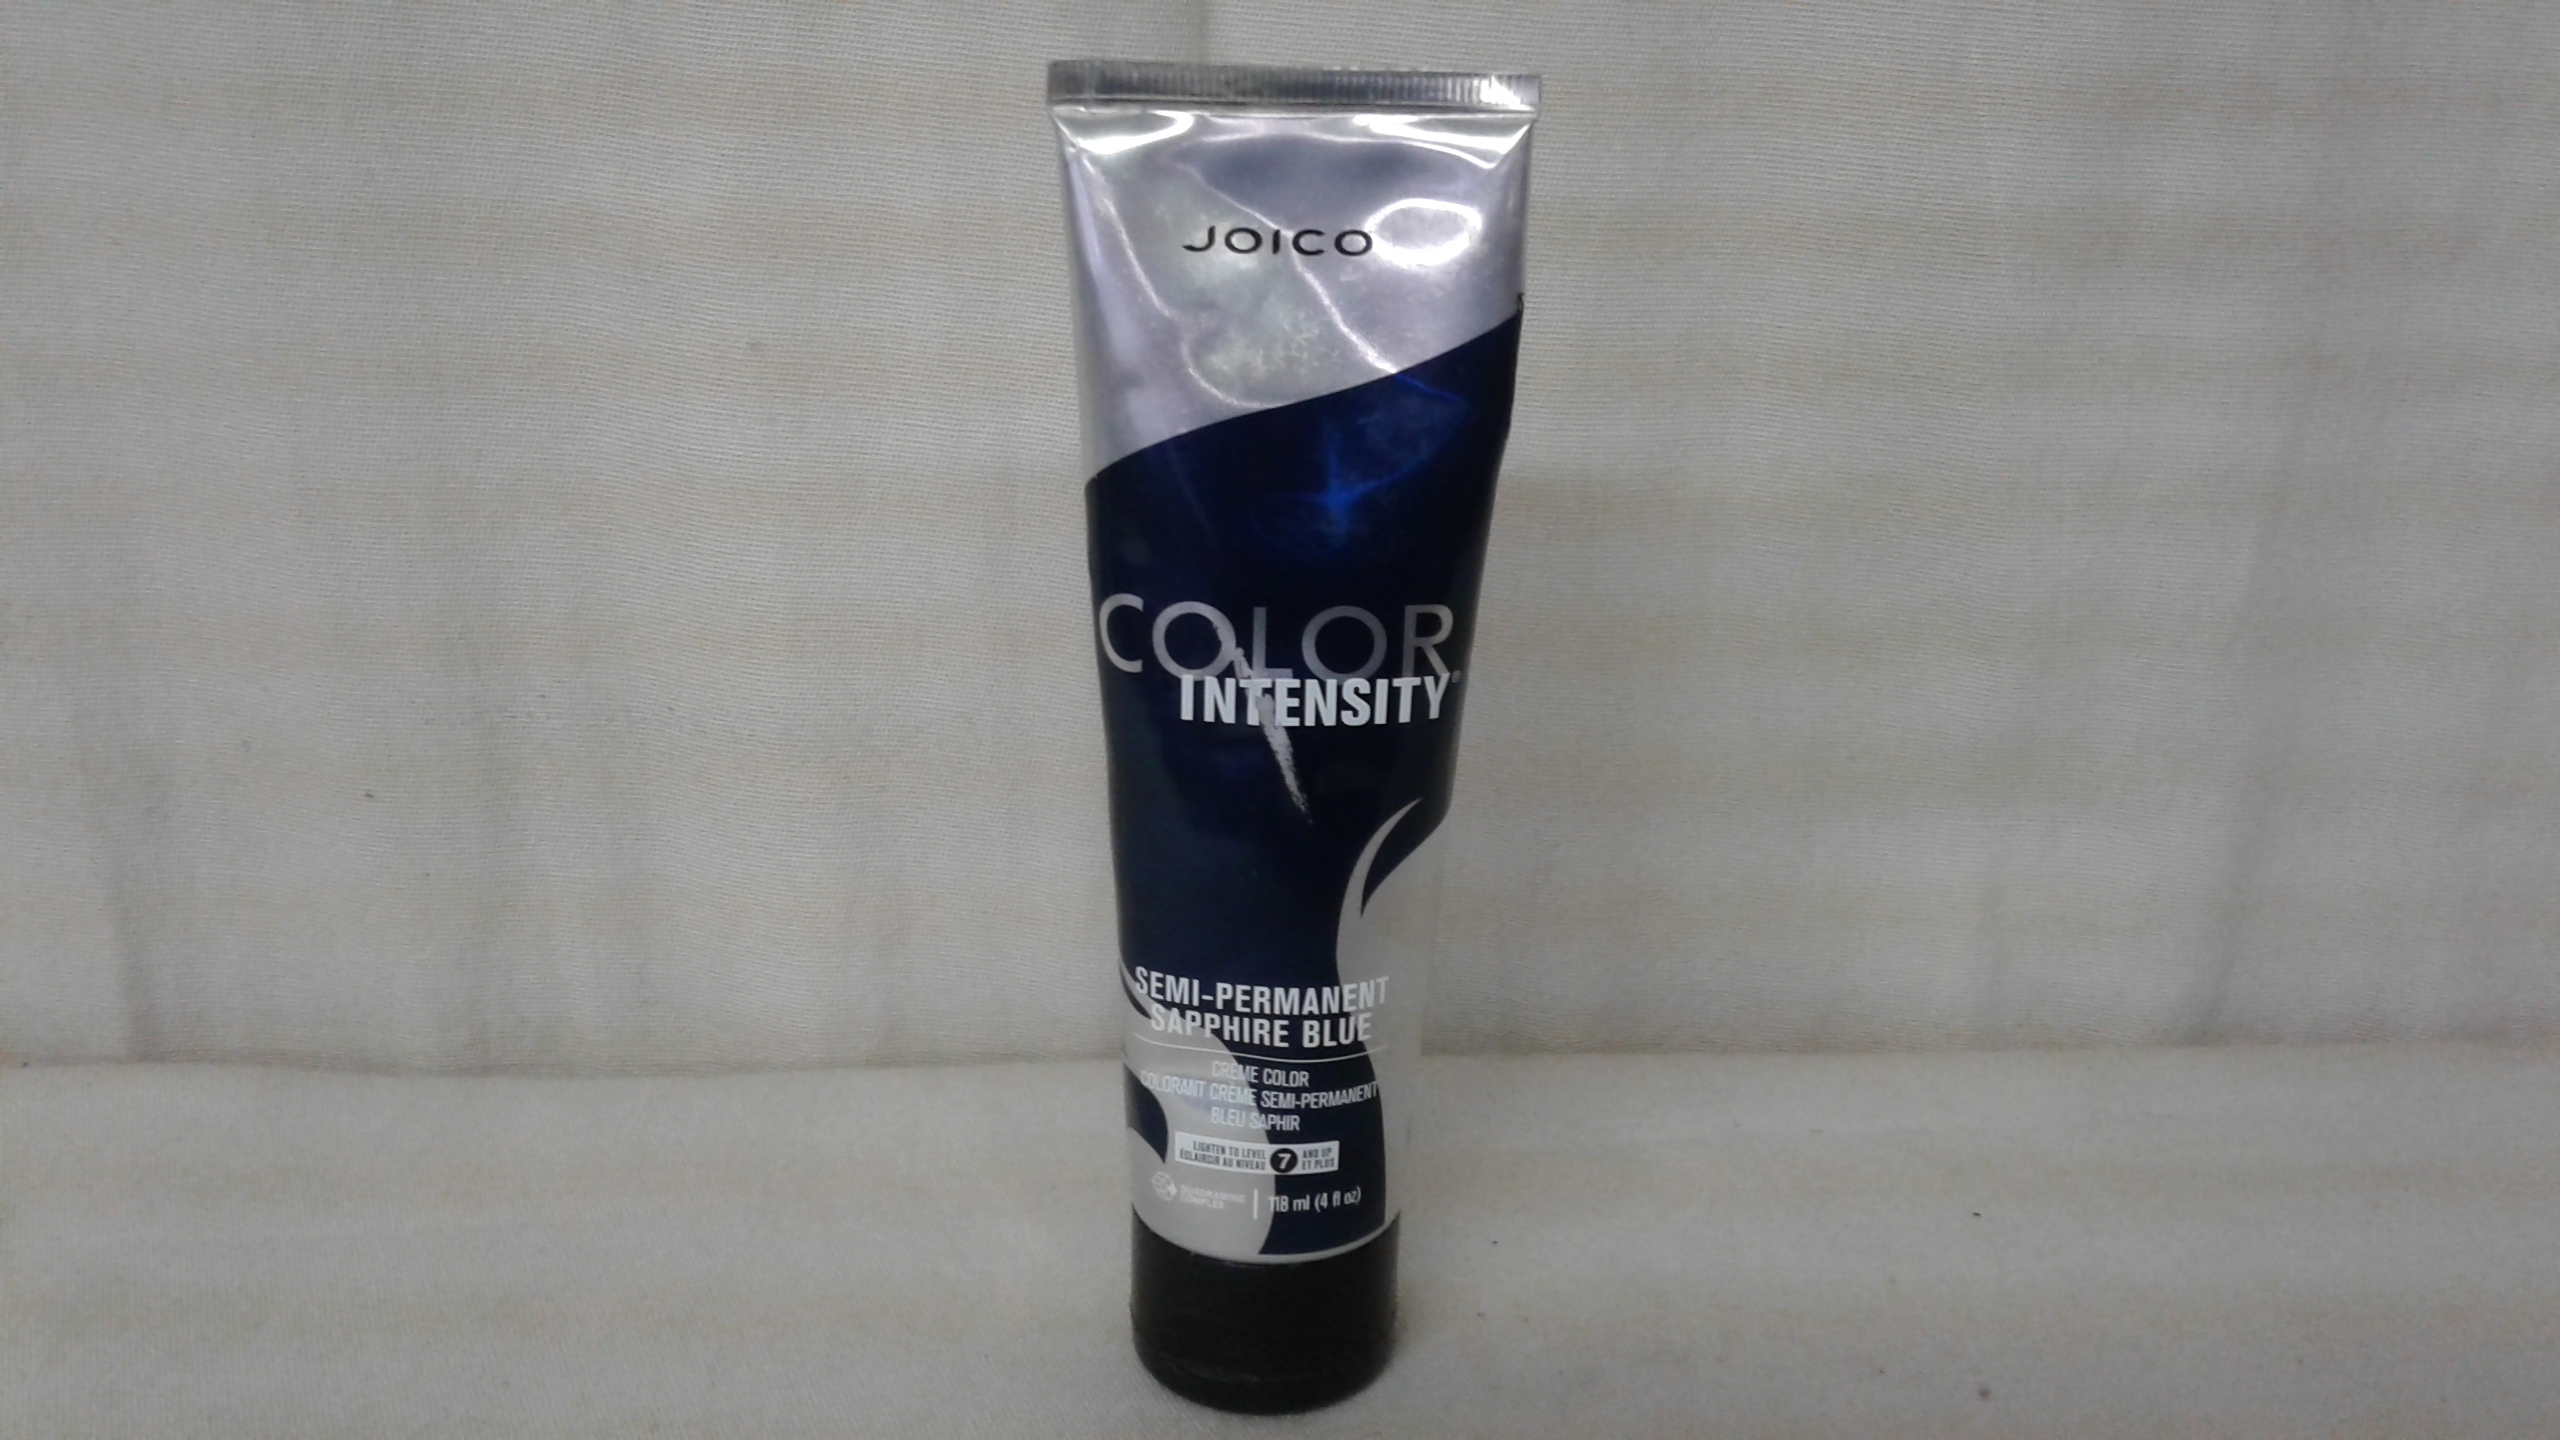 4. "Joico Color Intensity Semi-Permanent Hair Color in Sapphire Blue" - wide 7